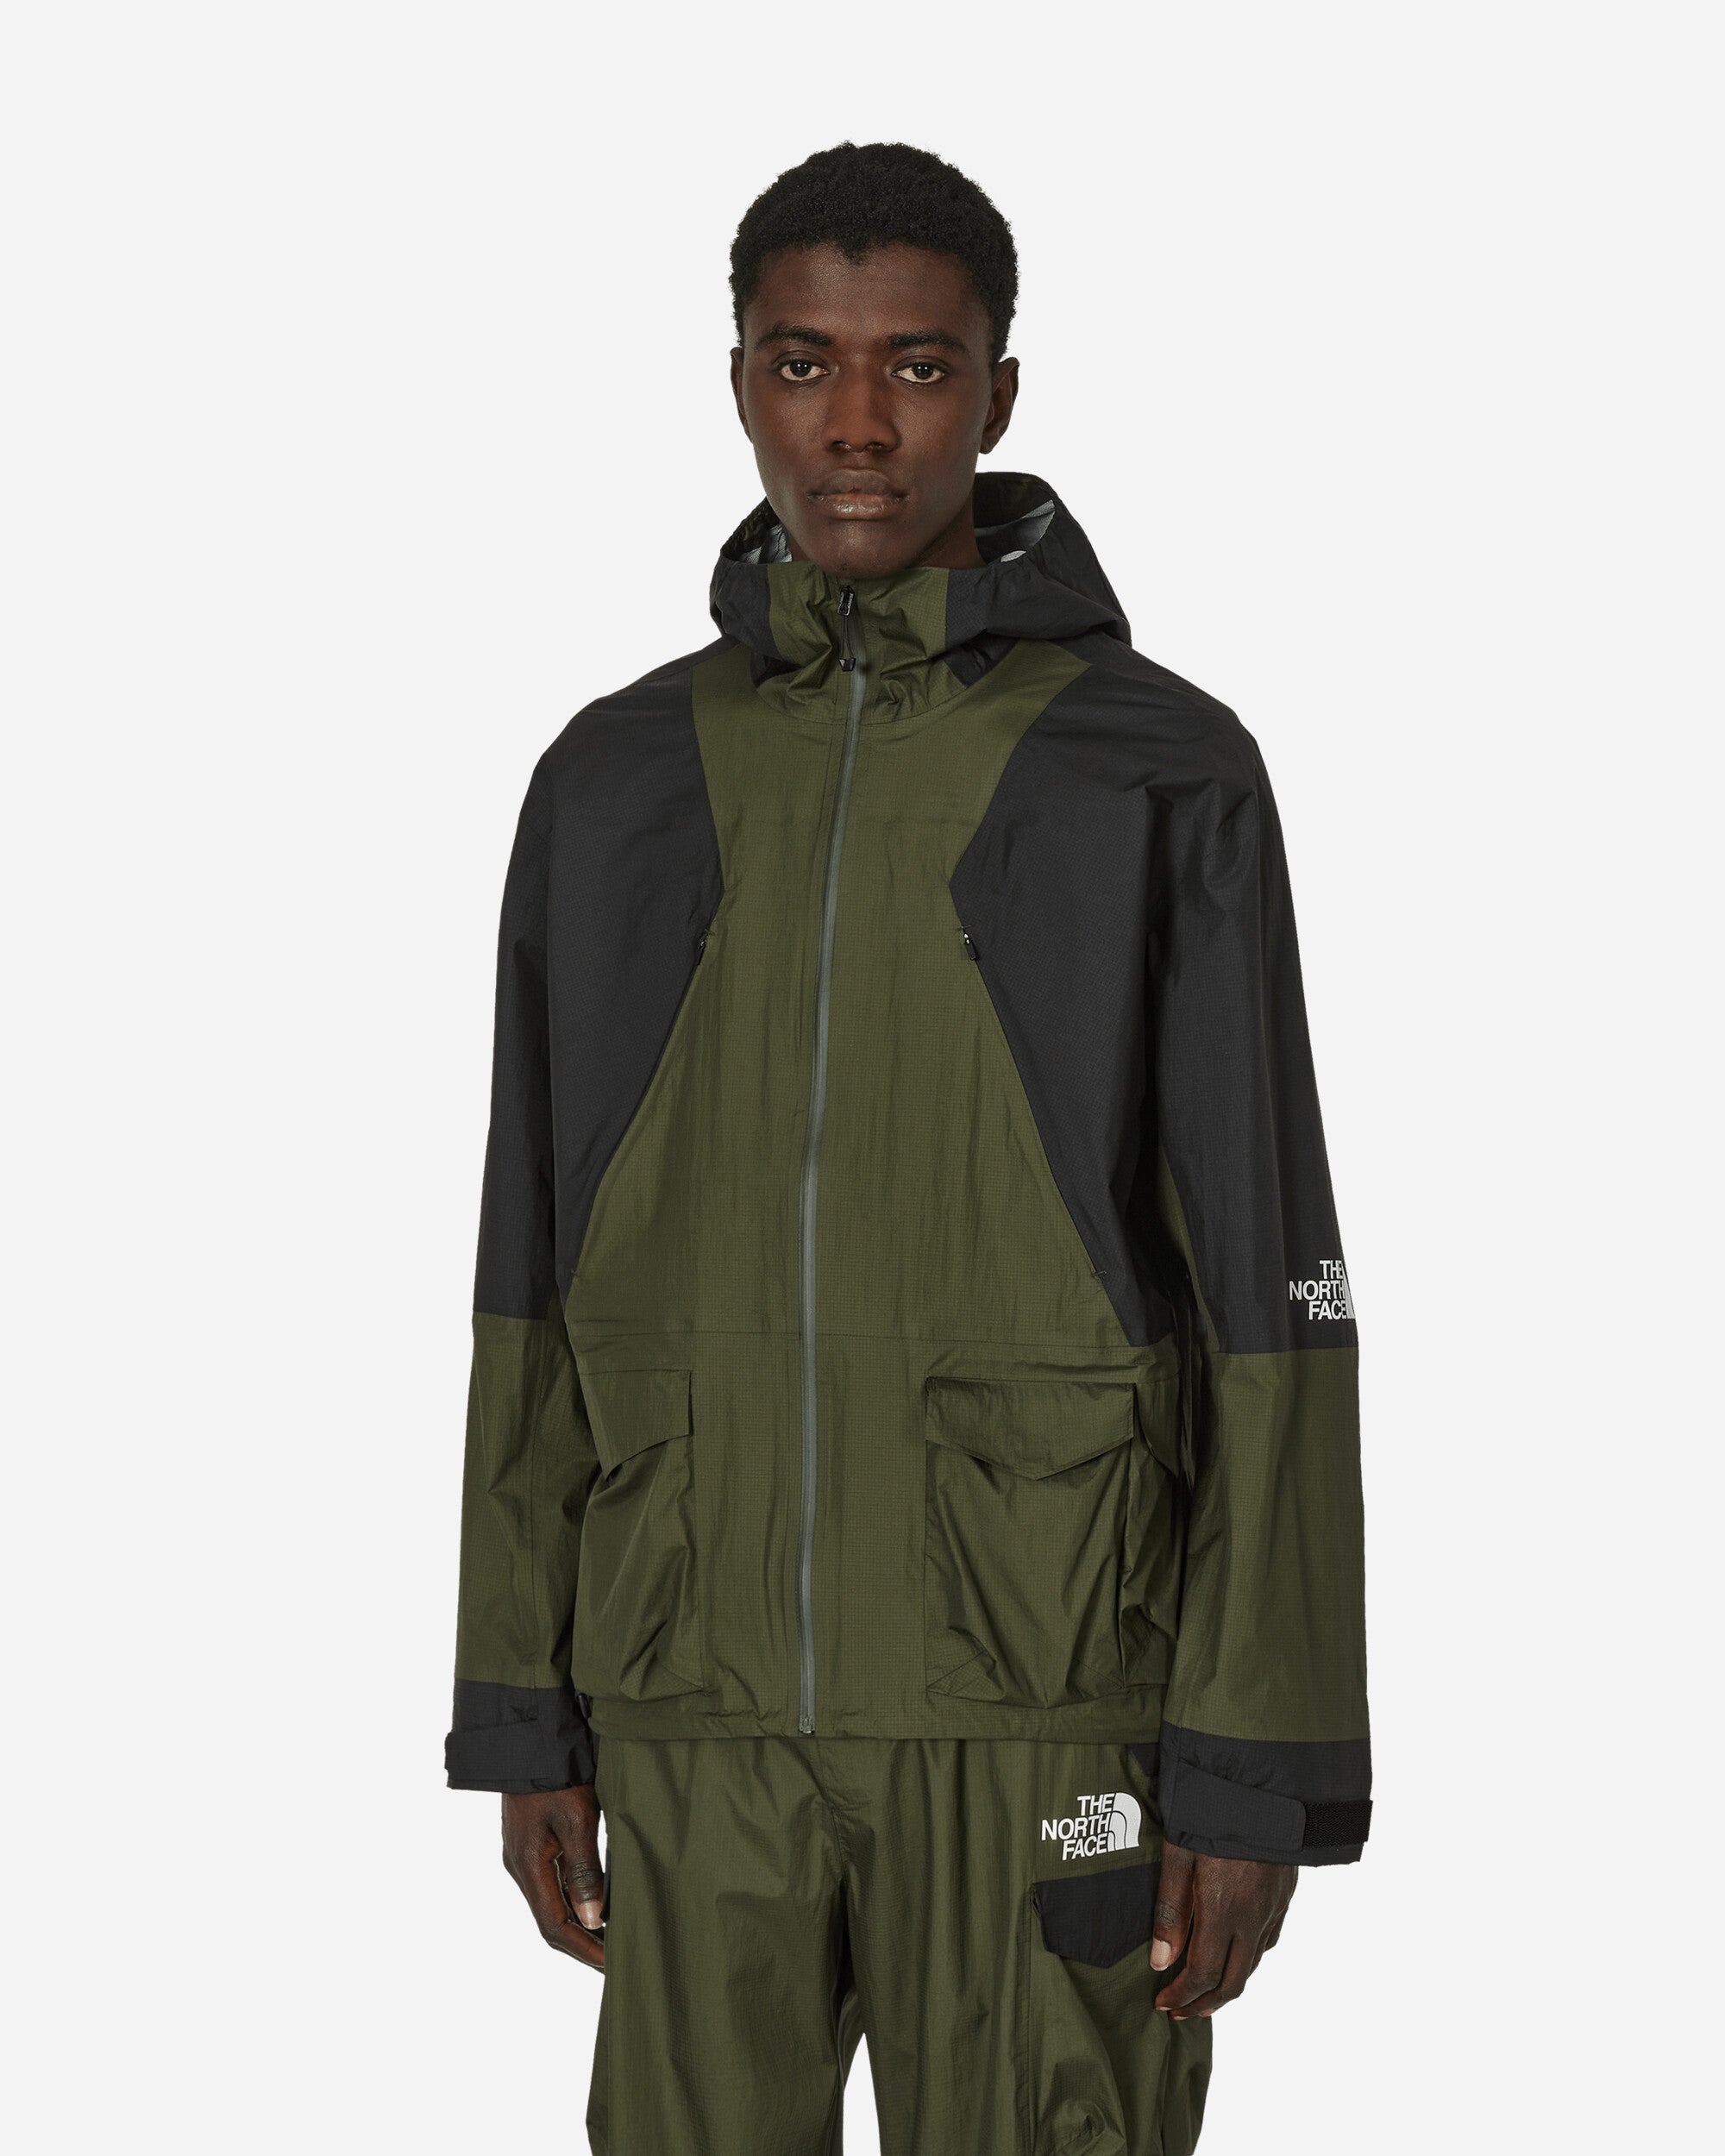 UNDERCOVER x THE NORTH FACE Jacket商品未使用